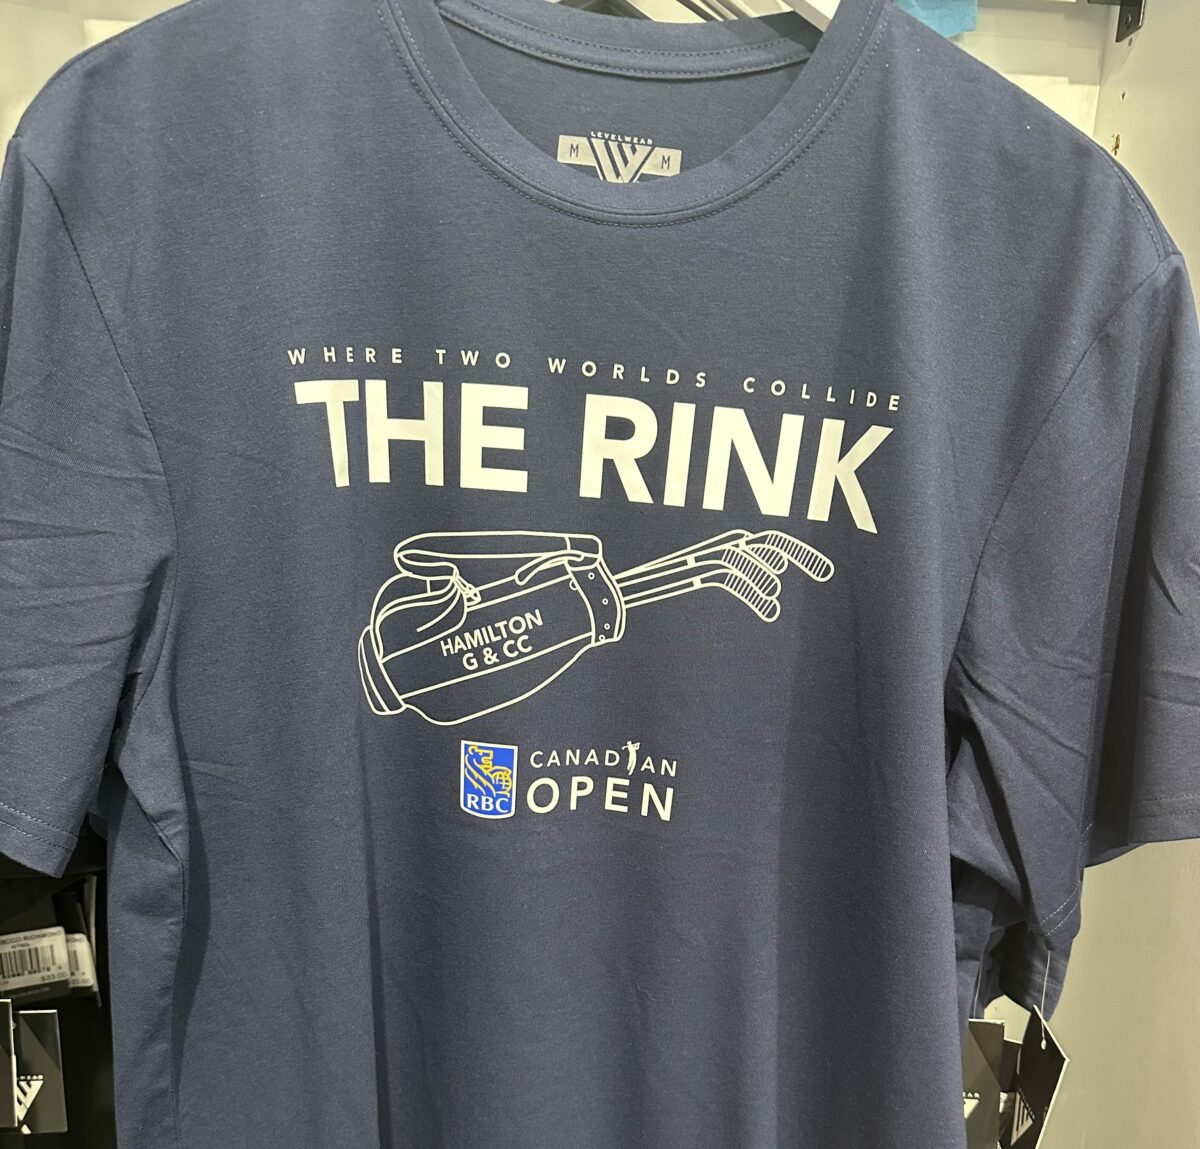 Photos: RBC Canadian Open merchandise features maple leafs, ‘The Rink’ and Nick Taylor’s ‘The Putt’ logo